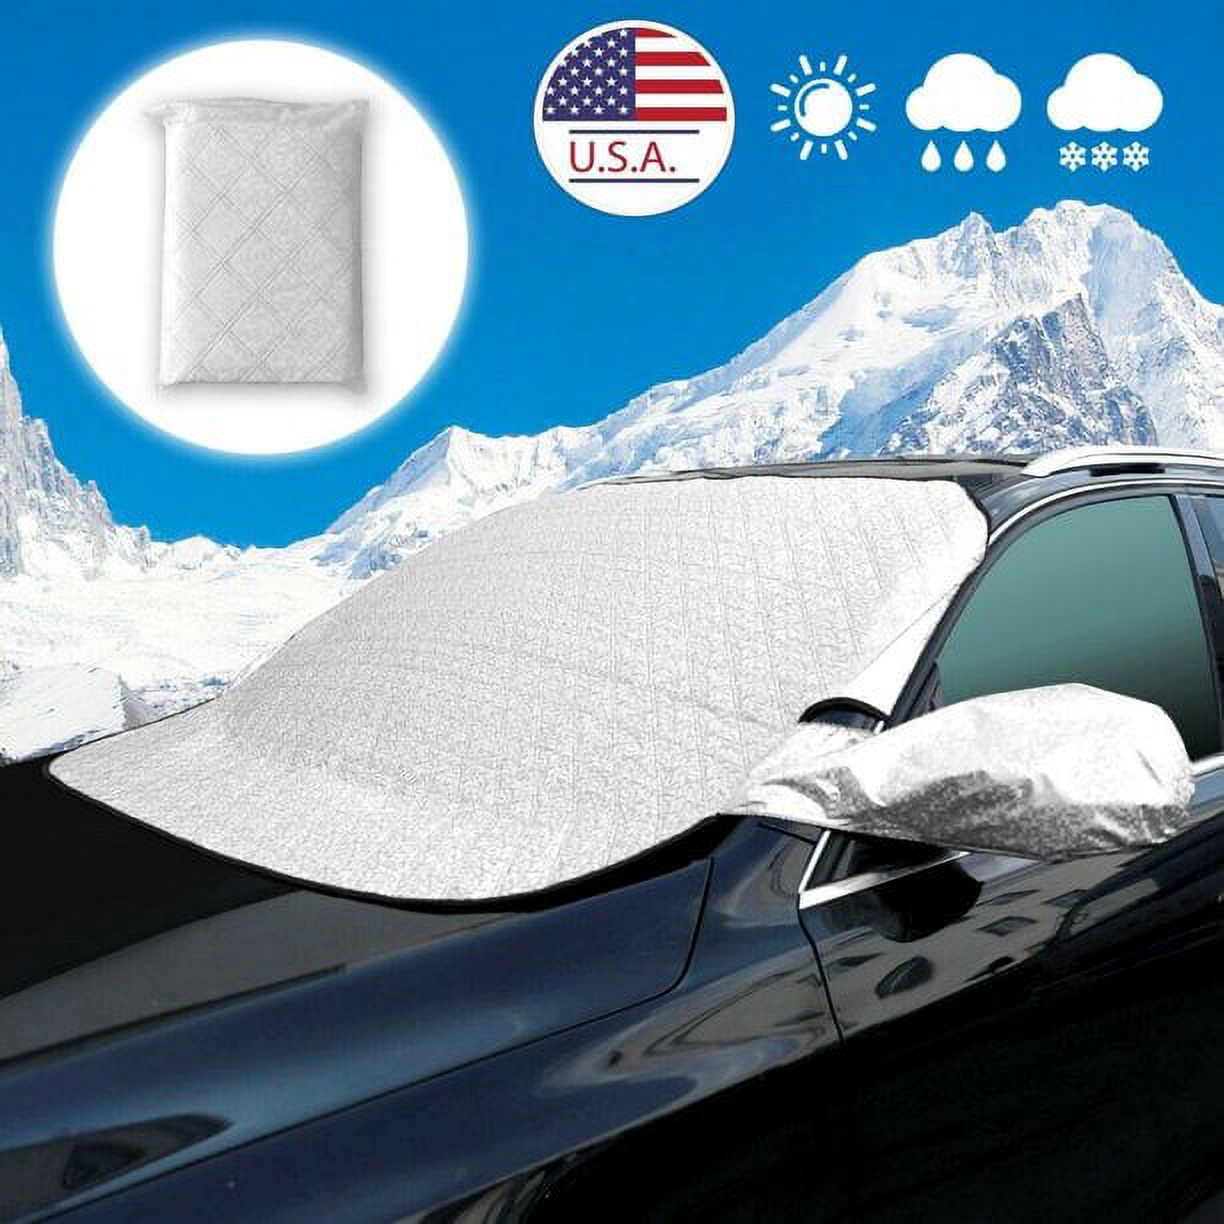 EASTIN Car Windshield Snow Cover, Car Windshield Cover for Snow, Ice, Sun, Frost Defense with 4 Layers Protection, Waterproof Windshield Cover Fits for Most Standard Cars & CRVs - image 1 of 6